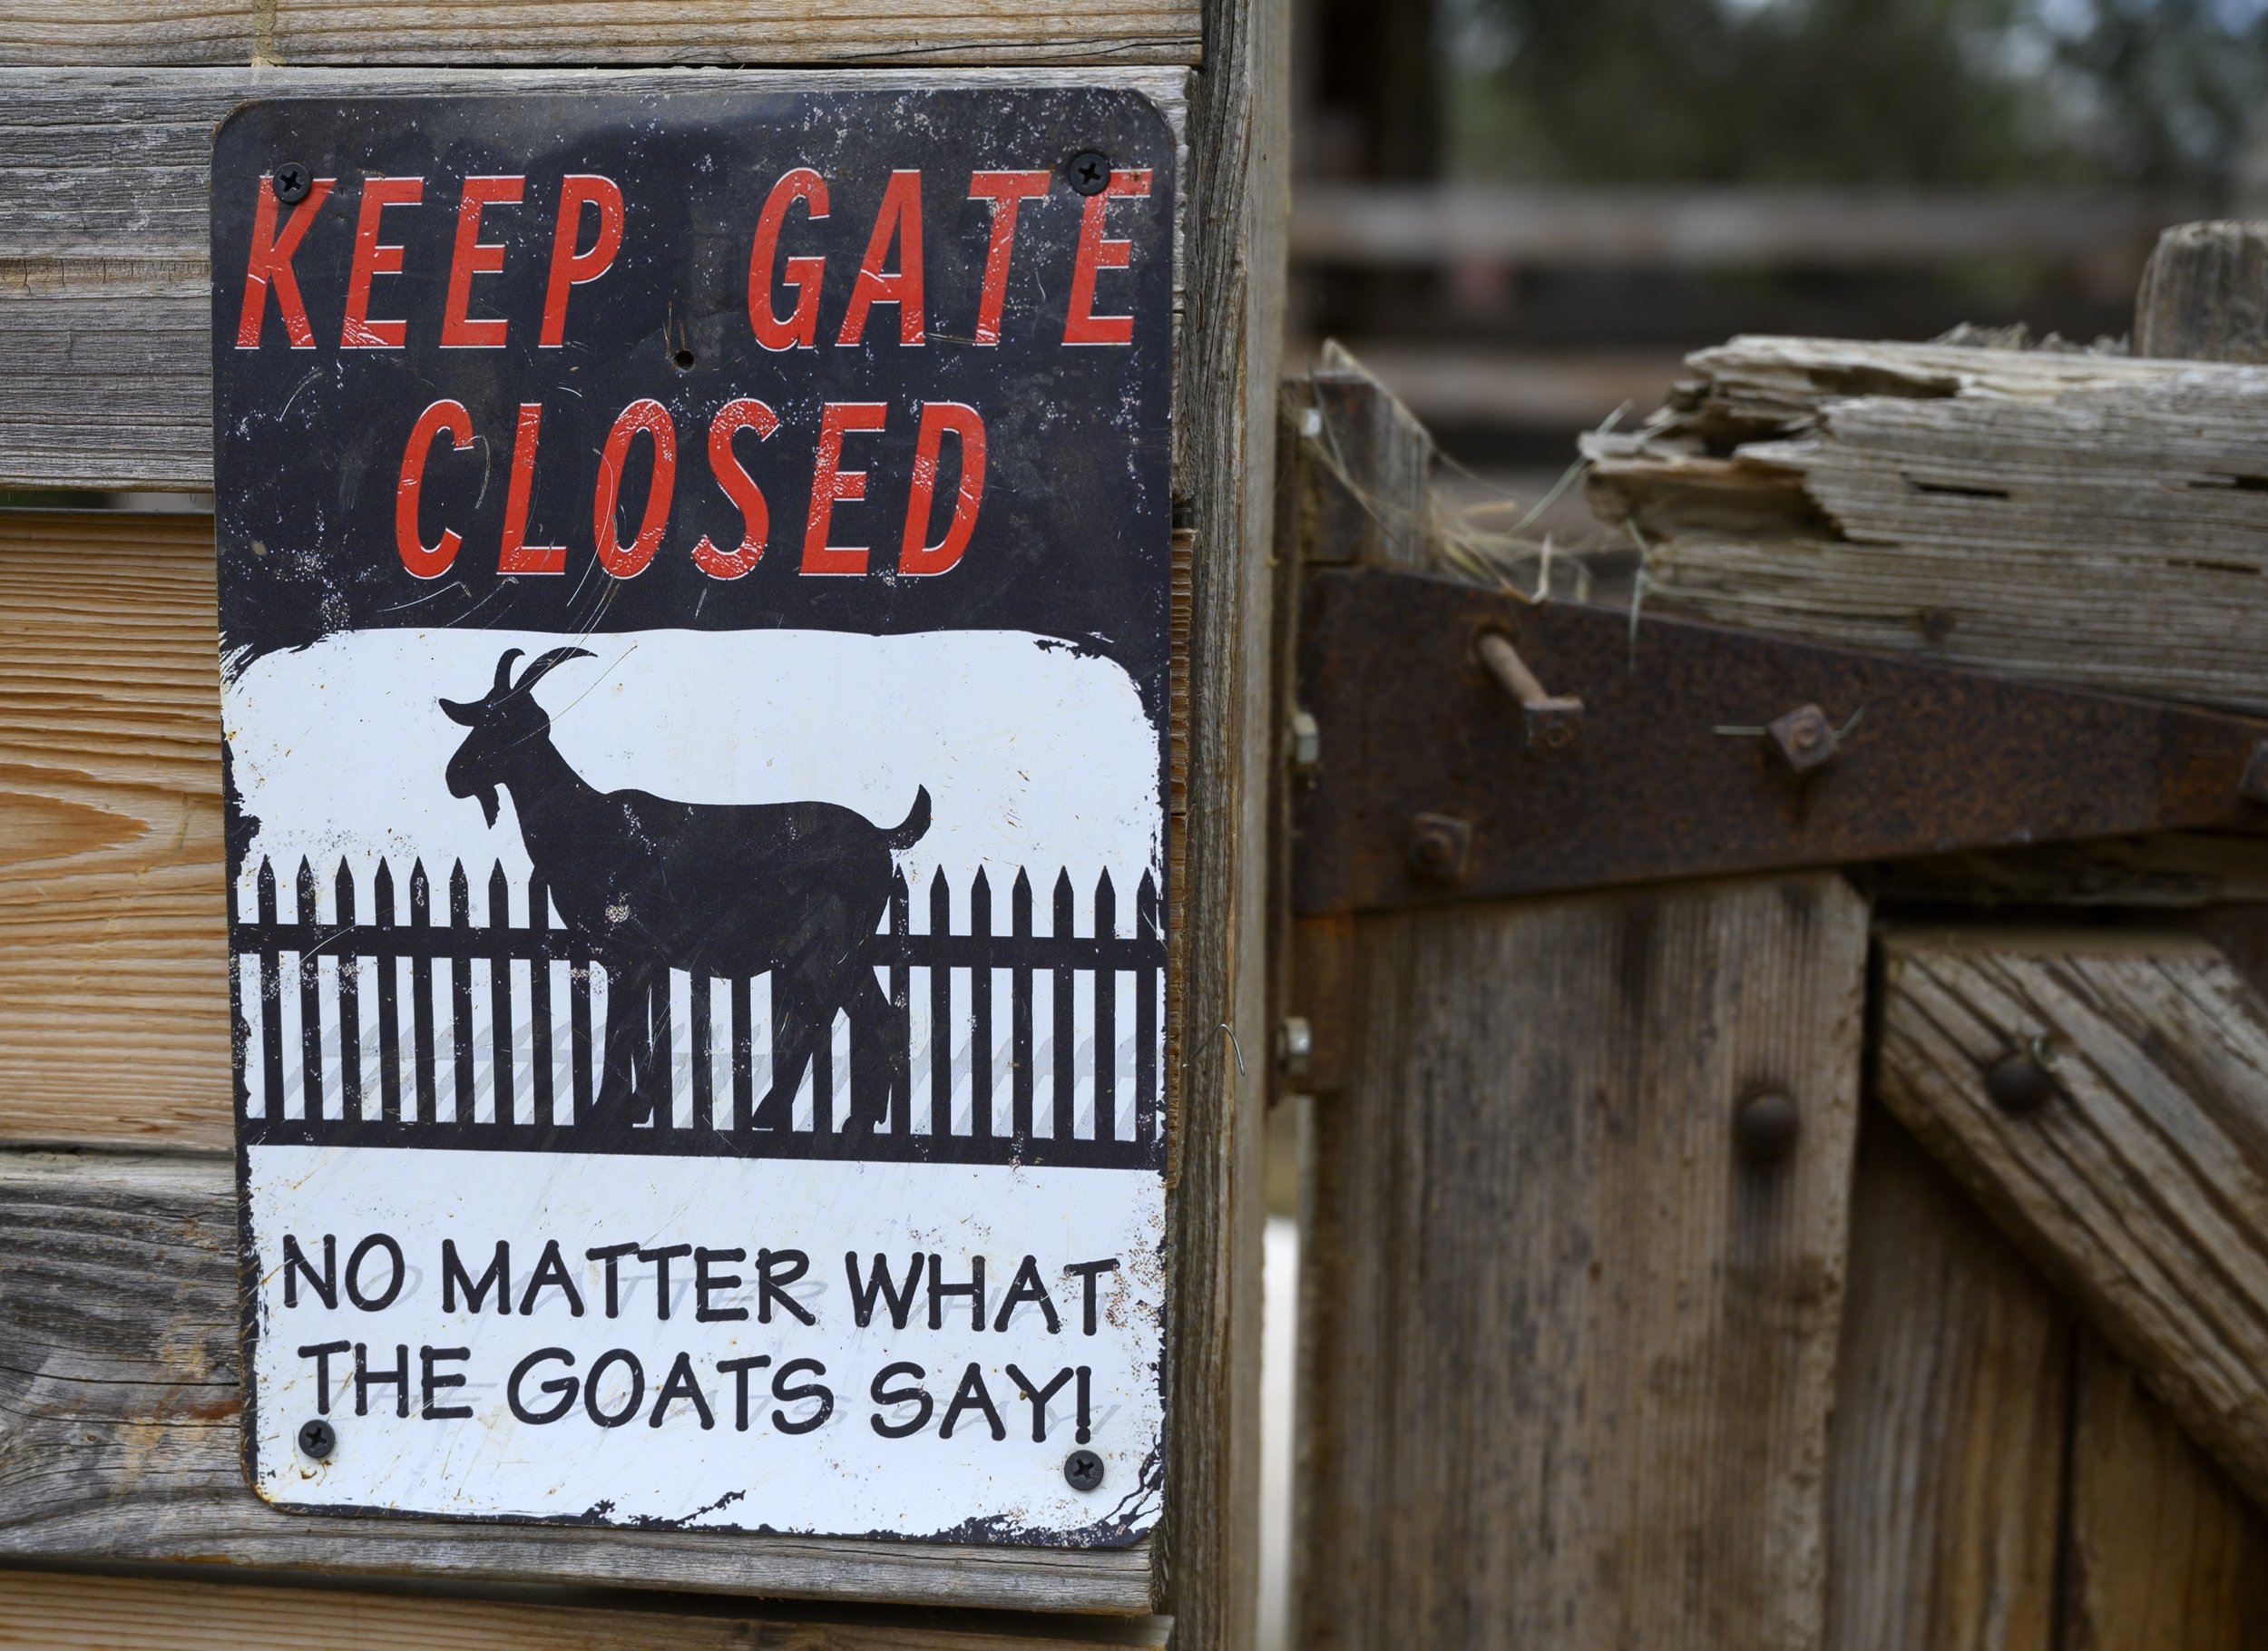  The landscape at Goods and Goats Market in San Juan Capistrano features goat-themed signs and authentic antiques.  